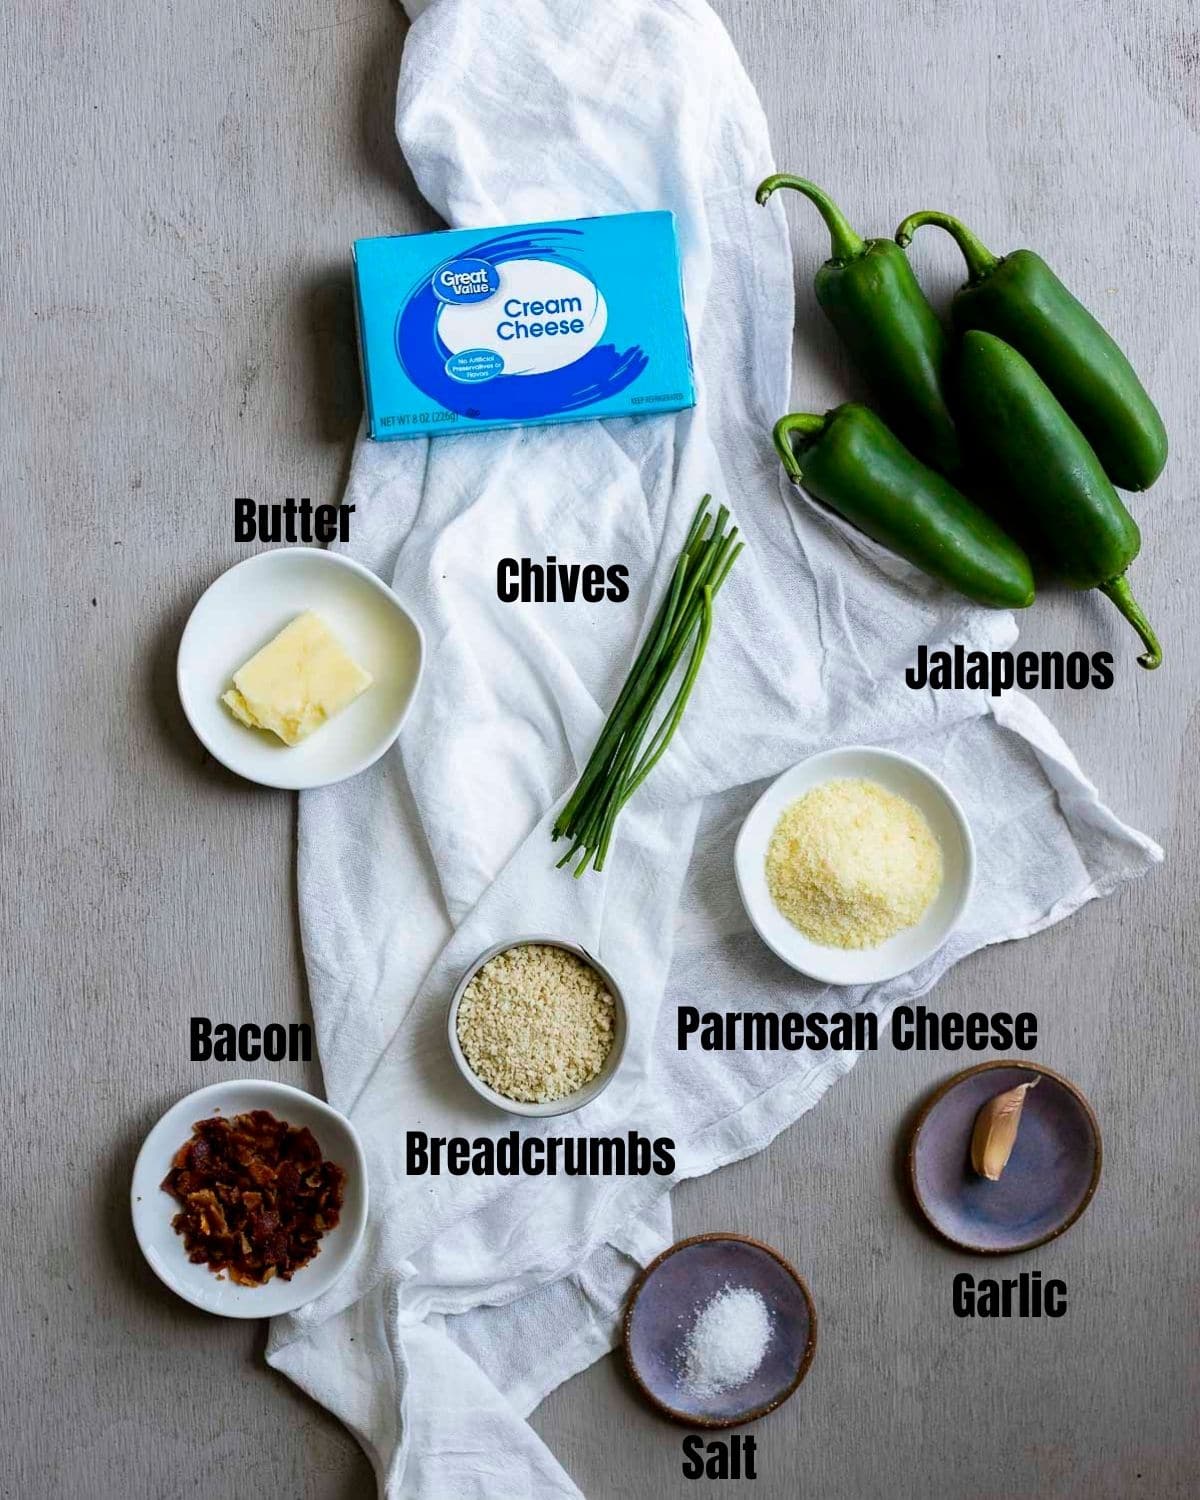 Ingredients to make jalapeno poppers arranged individually and labelled.